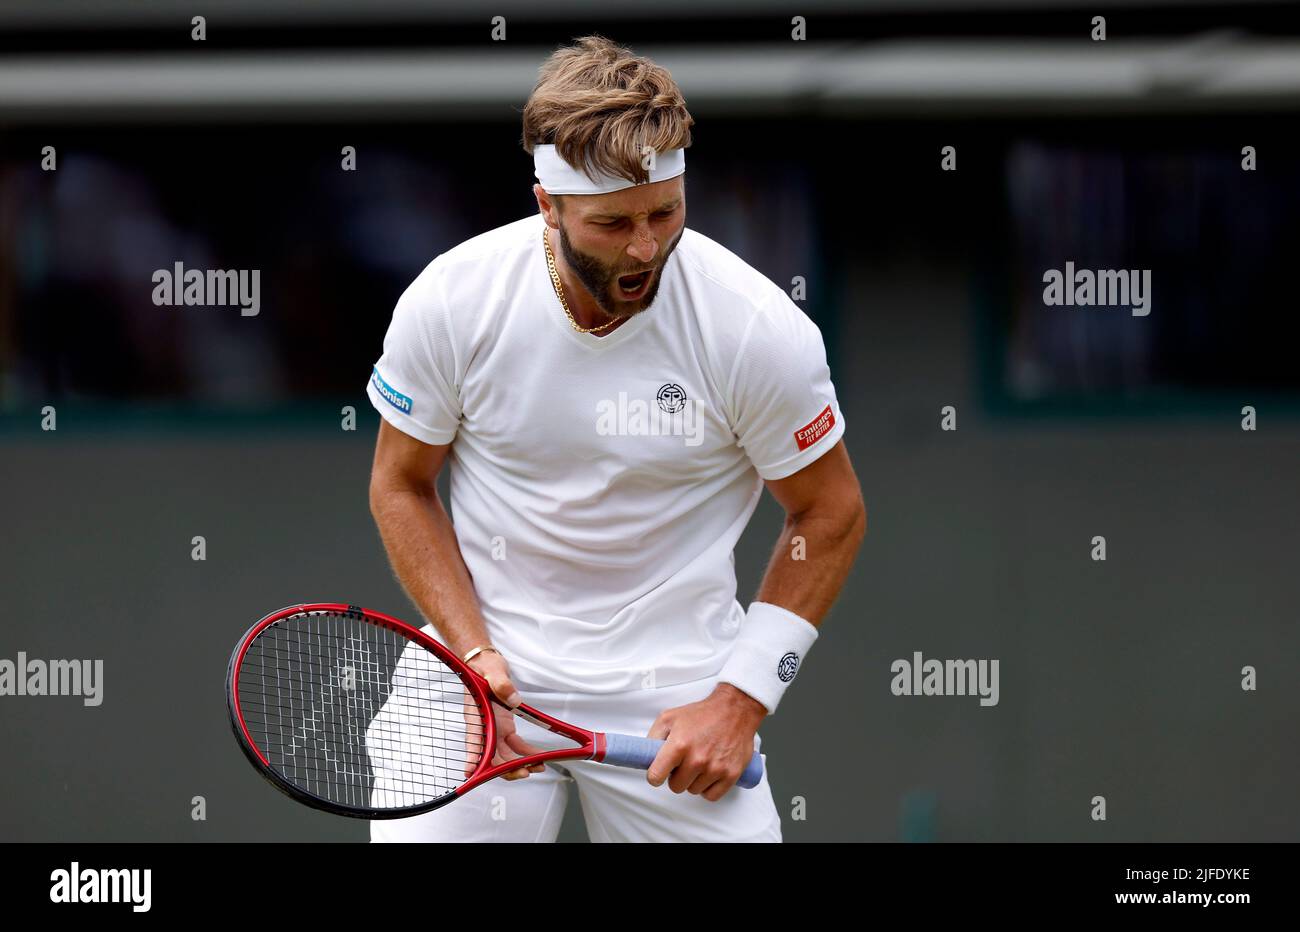 Liam Broady reacts during his Gentlemen's Singles third round match against Alex de Minaur during day six of the 2022 Wimbledon Championships at the All England Lawn Tennis and Croquet Club, Wimbledon. Picture date: Saturday July 2, 2022. Stock Photo